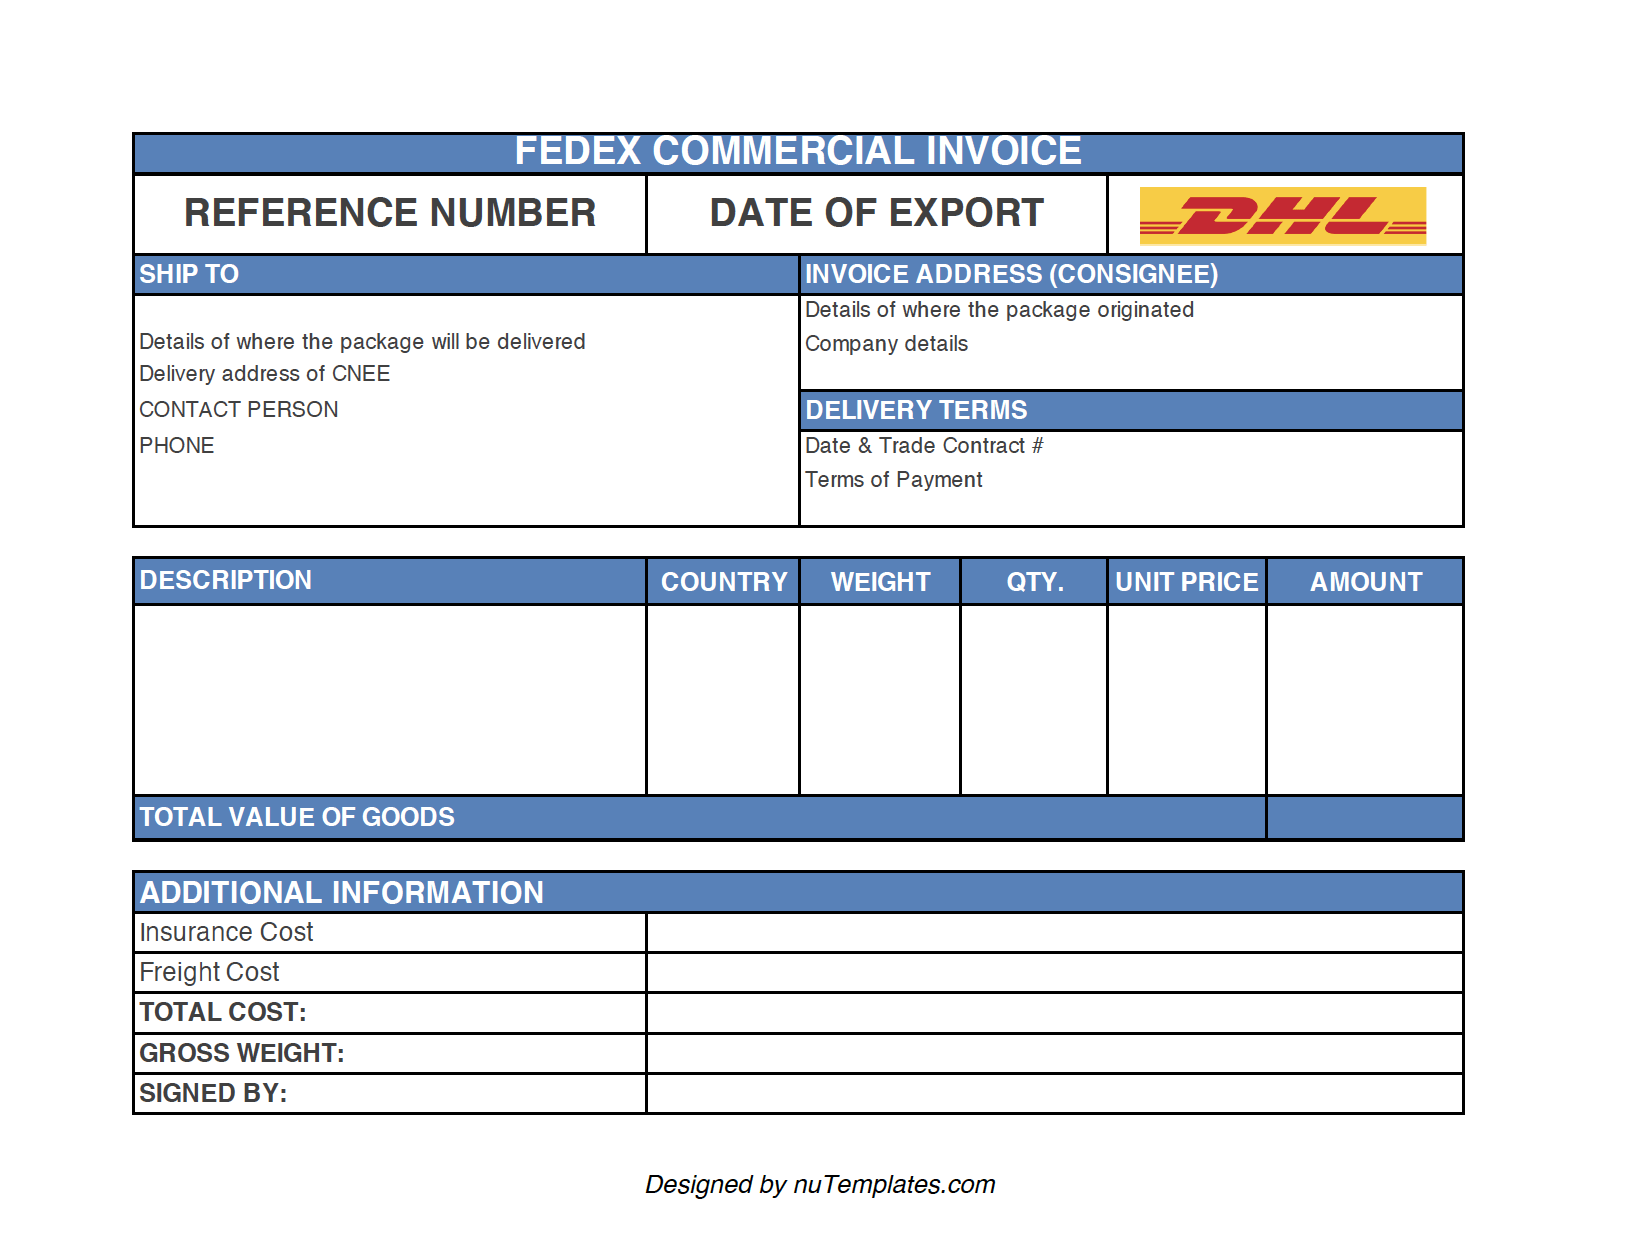 DHL Commercial Invoice Template DHL Invoices NuTemplates